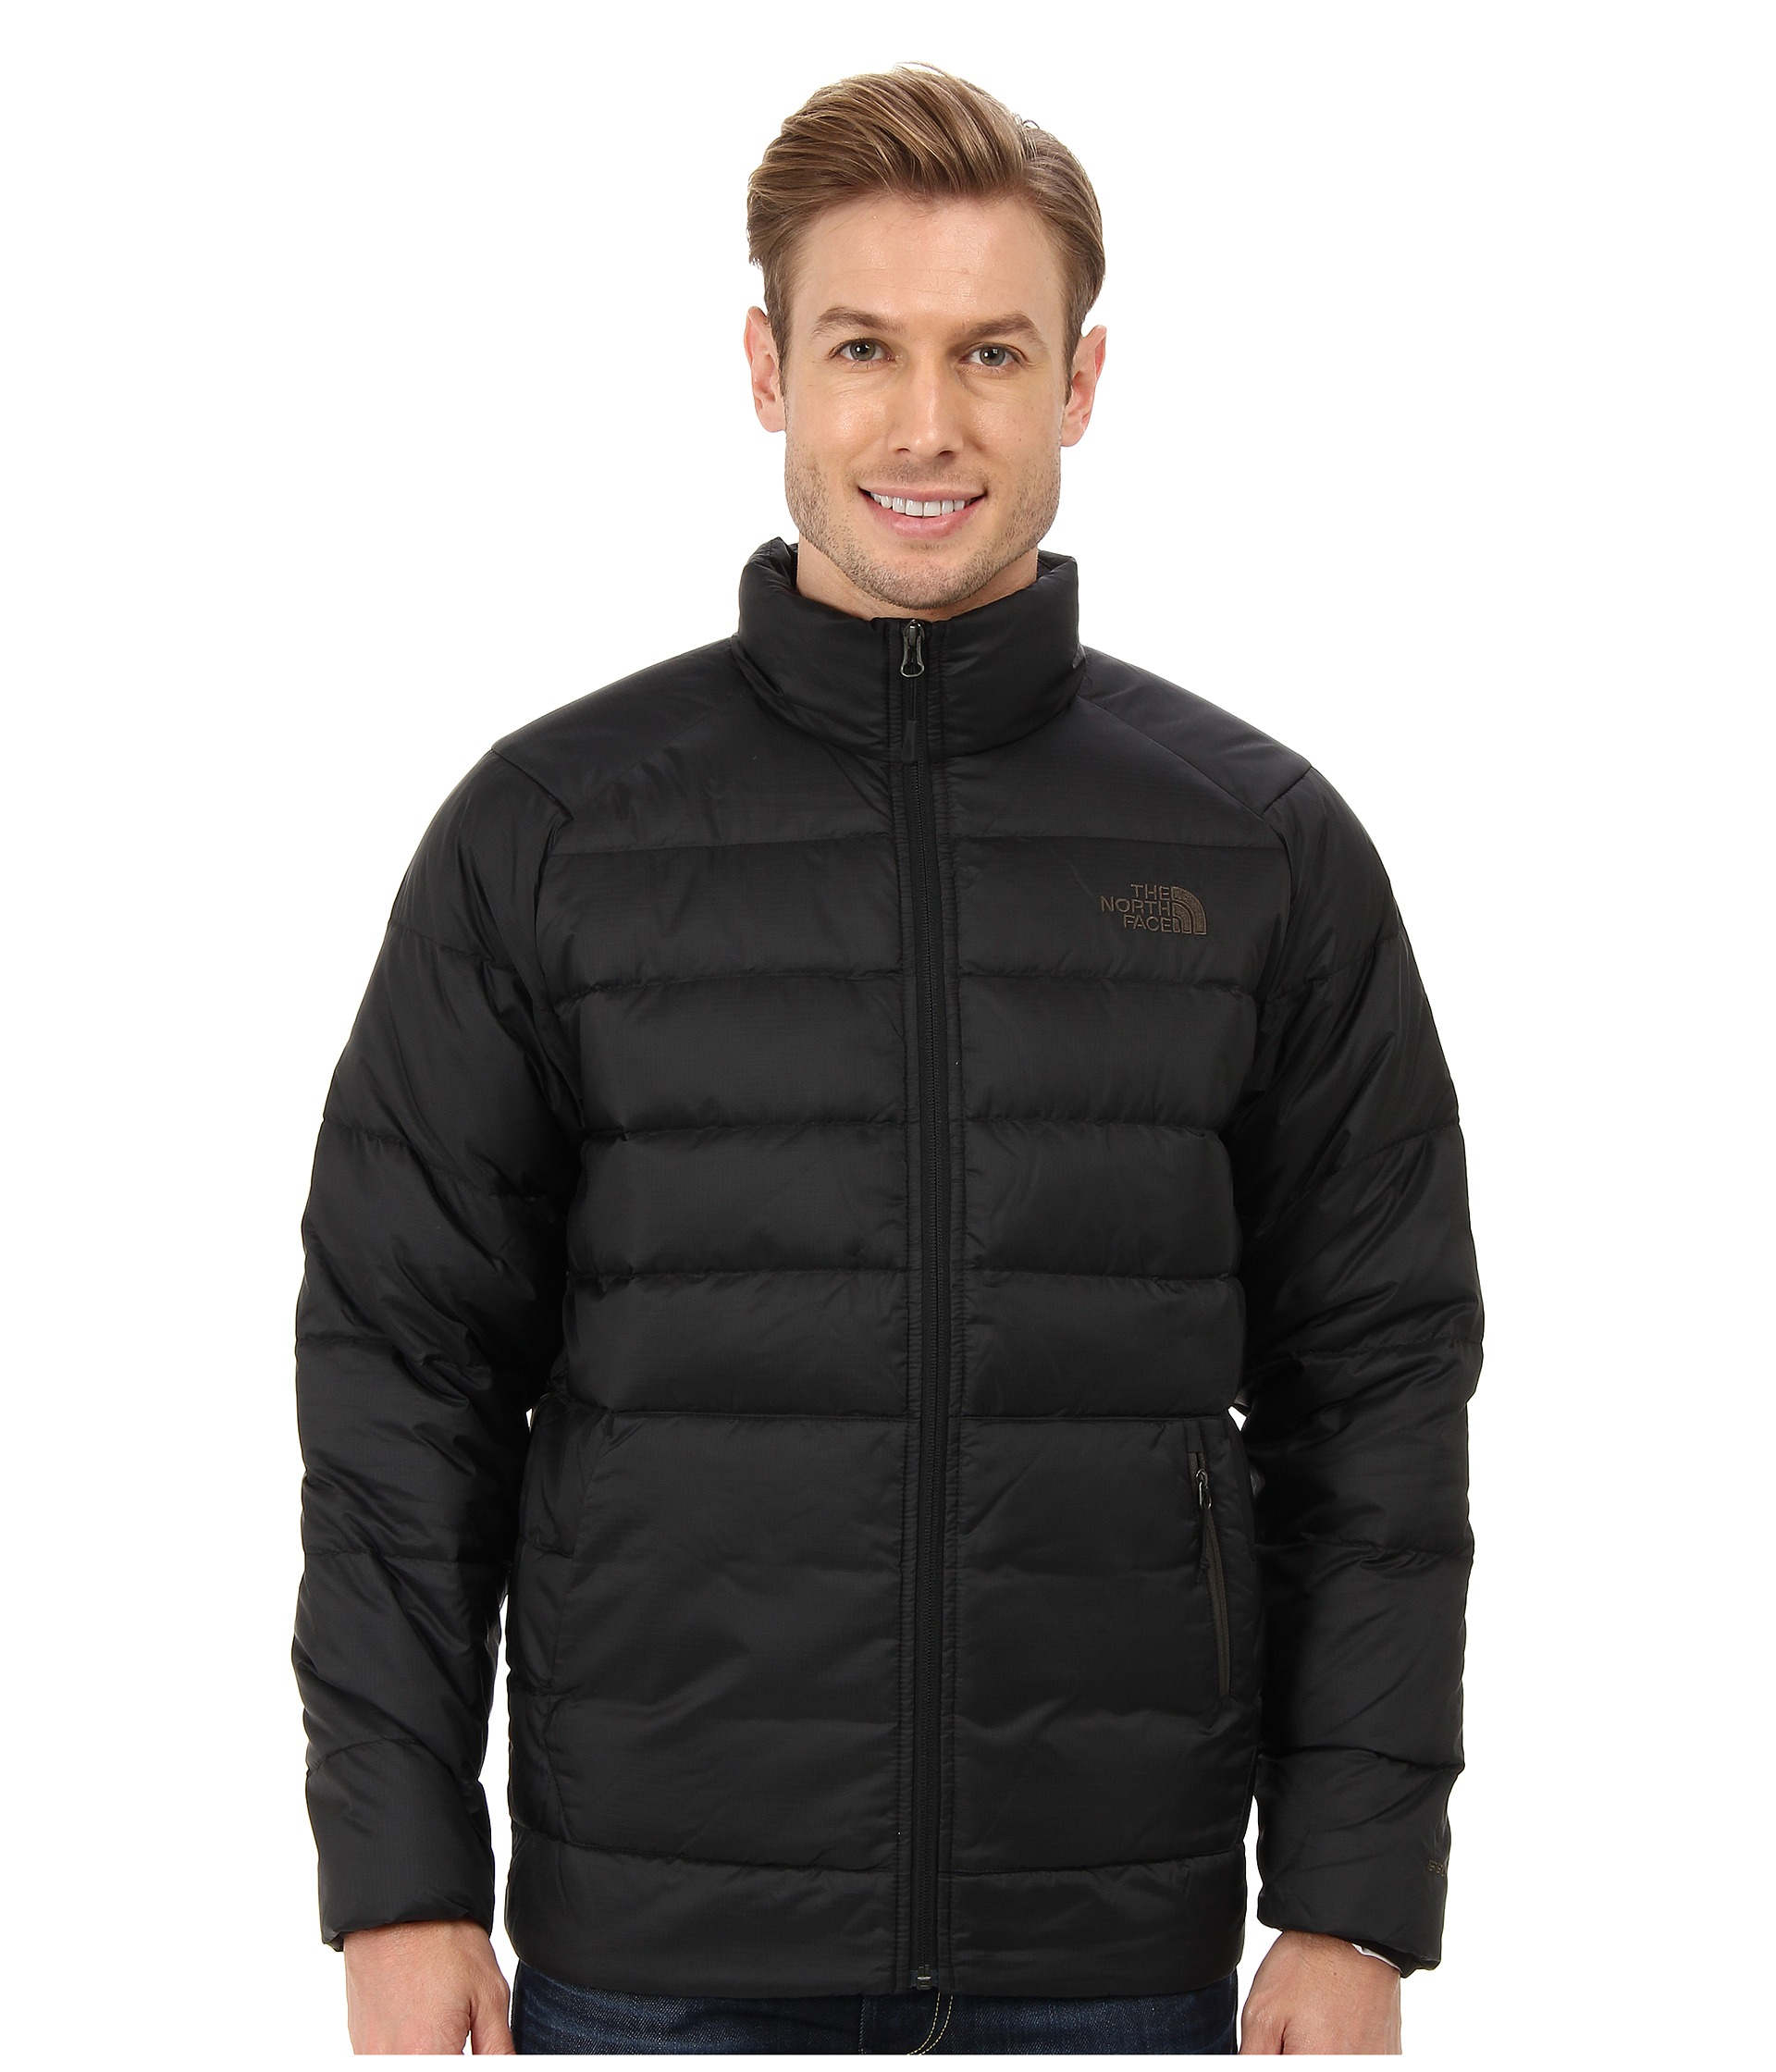 The North Face Synthetic Aconcagua Jacket in Black for Men - Lyst